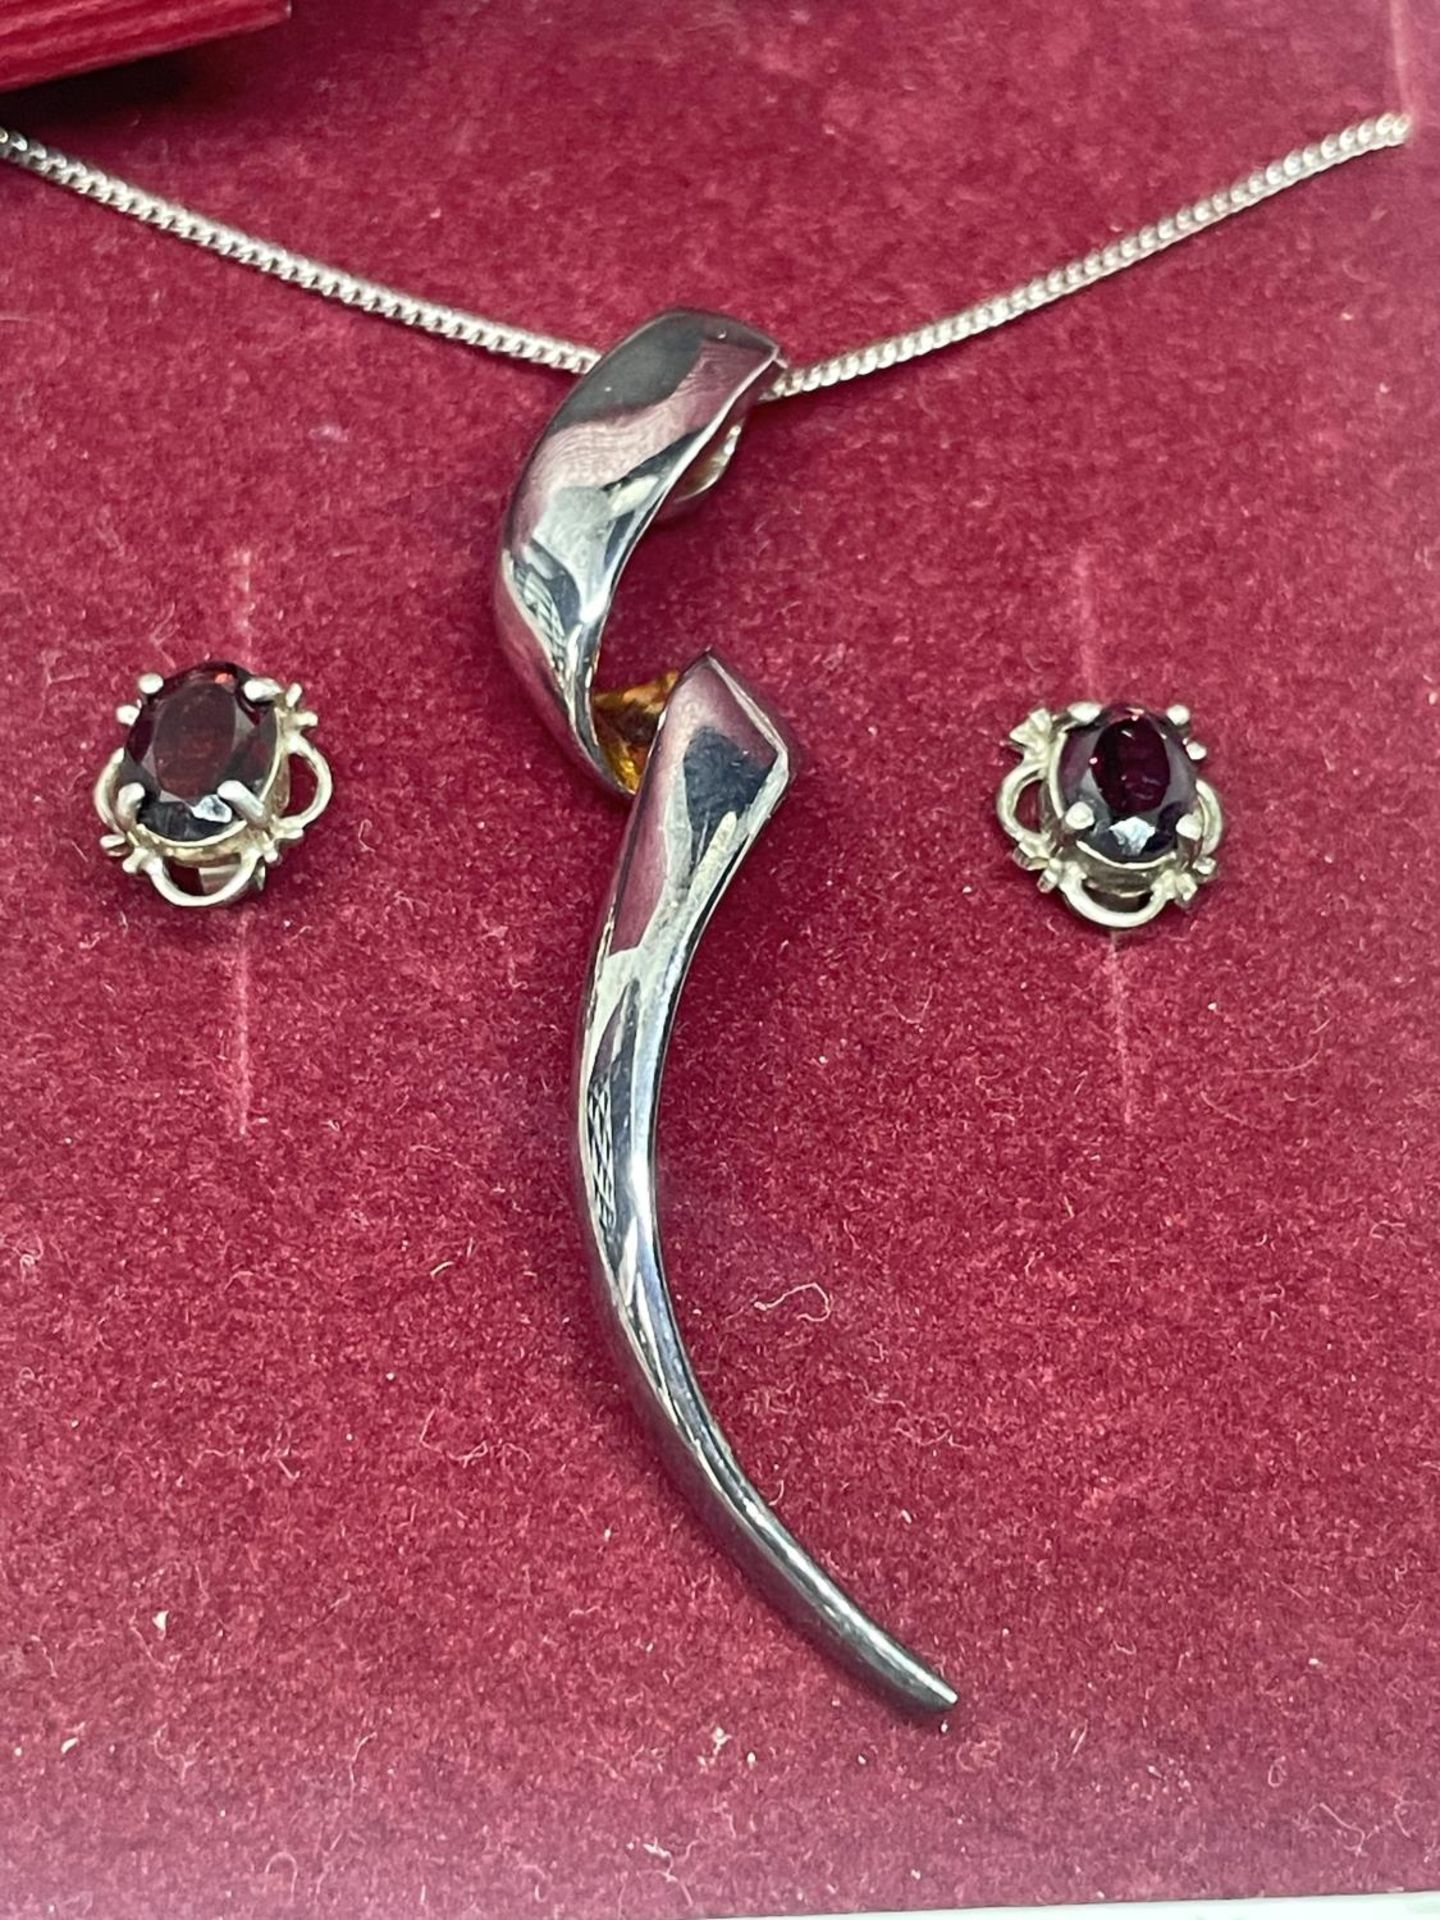 A SILVER NECKLACE AND EARRINGS SET IN A PRESENTATION BOX - Image 2 of 3